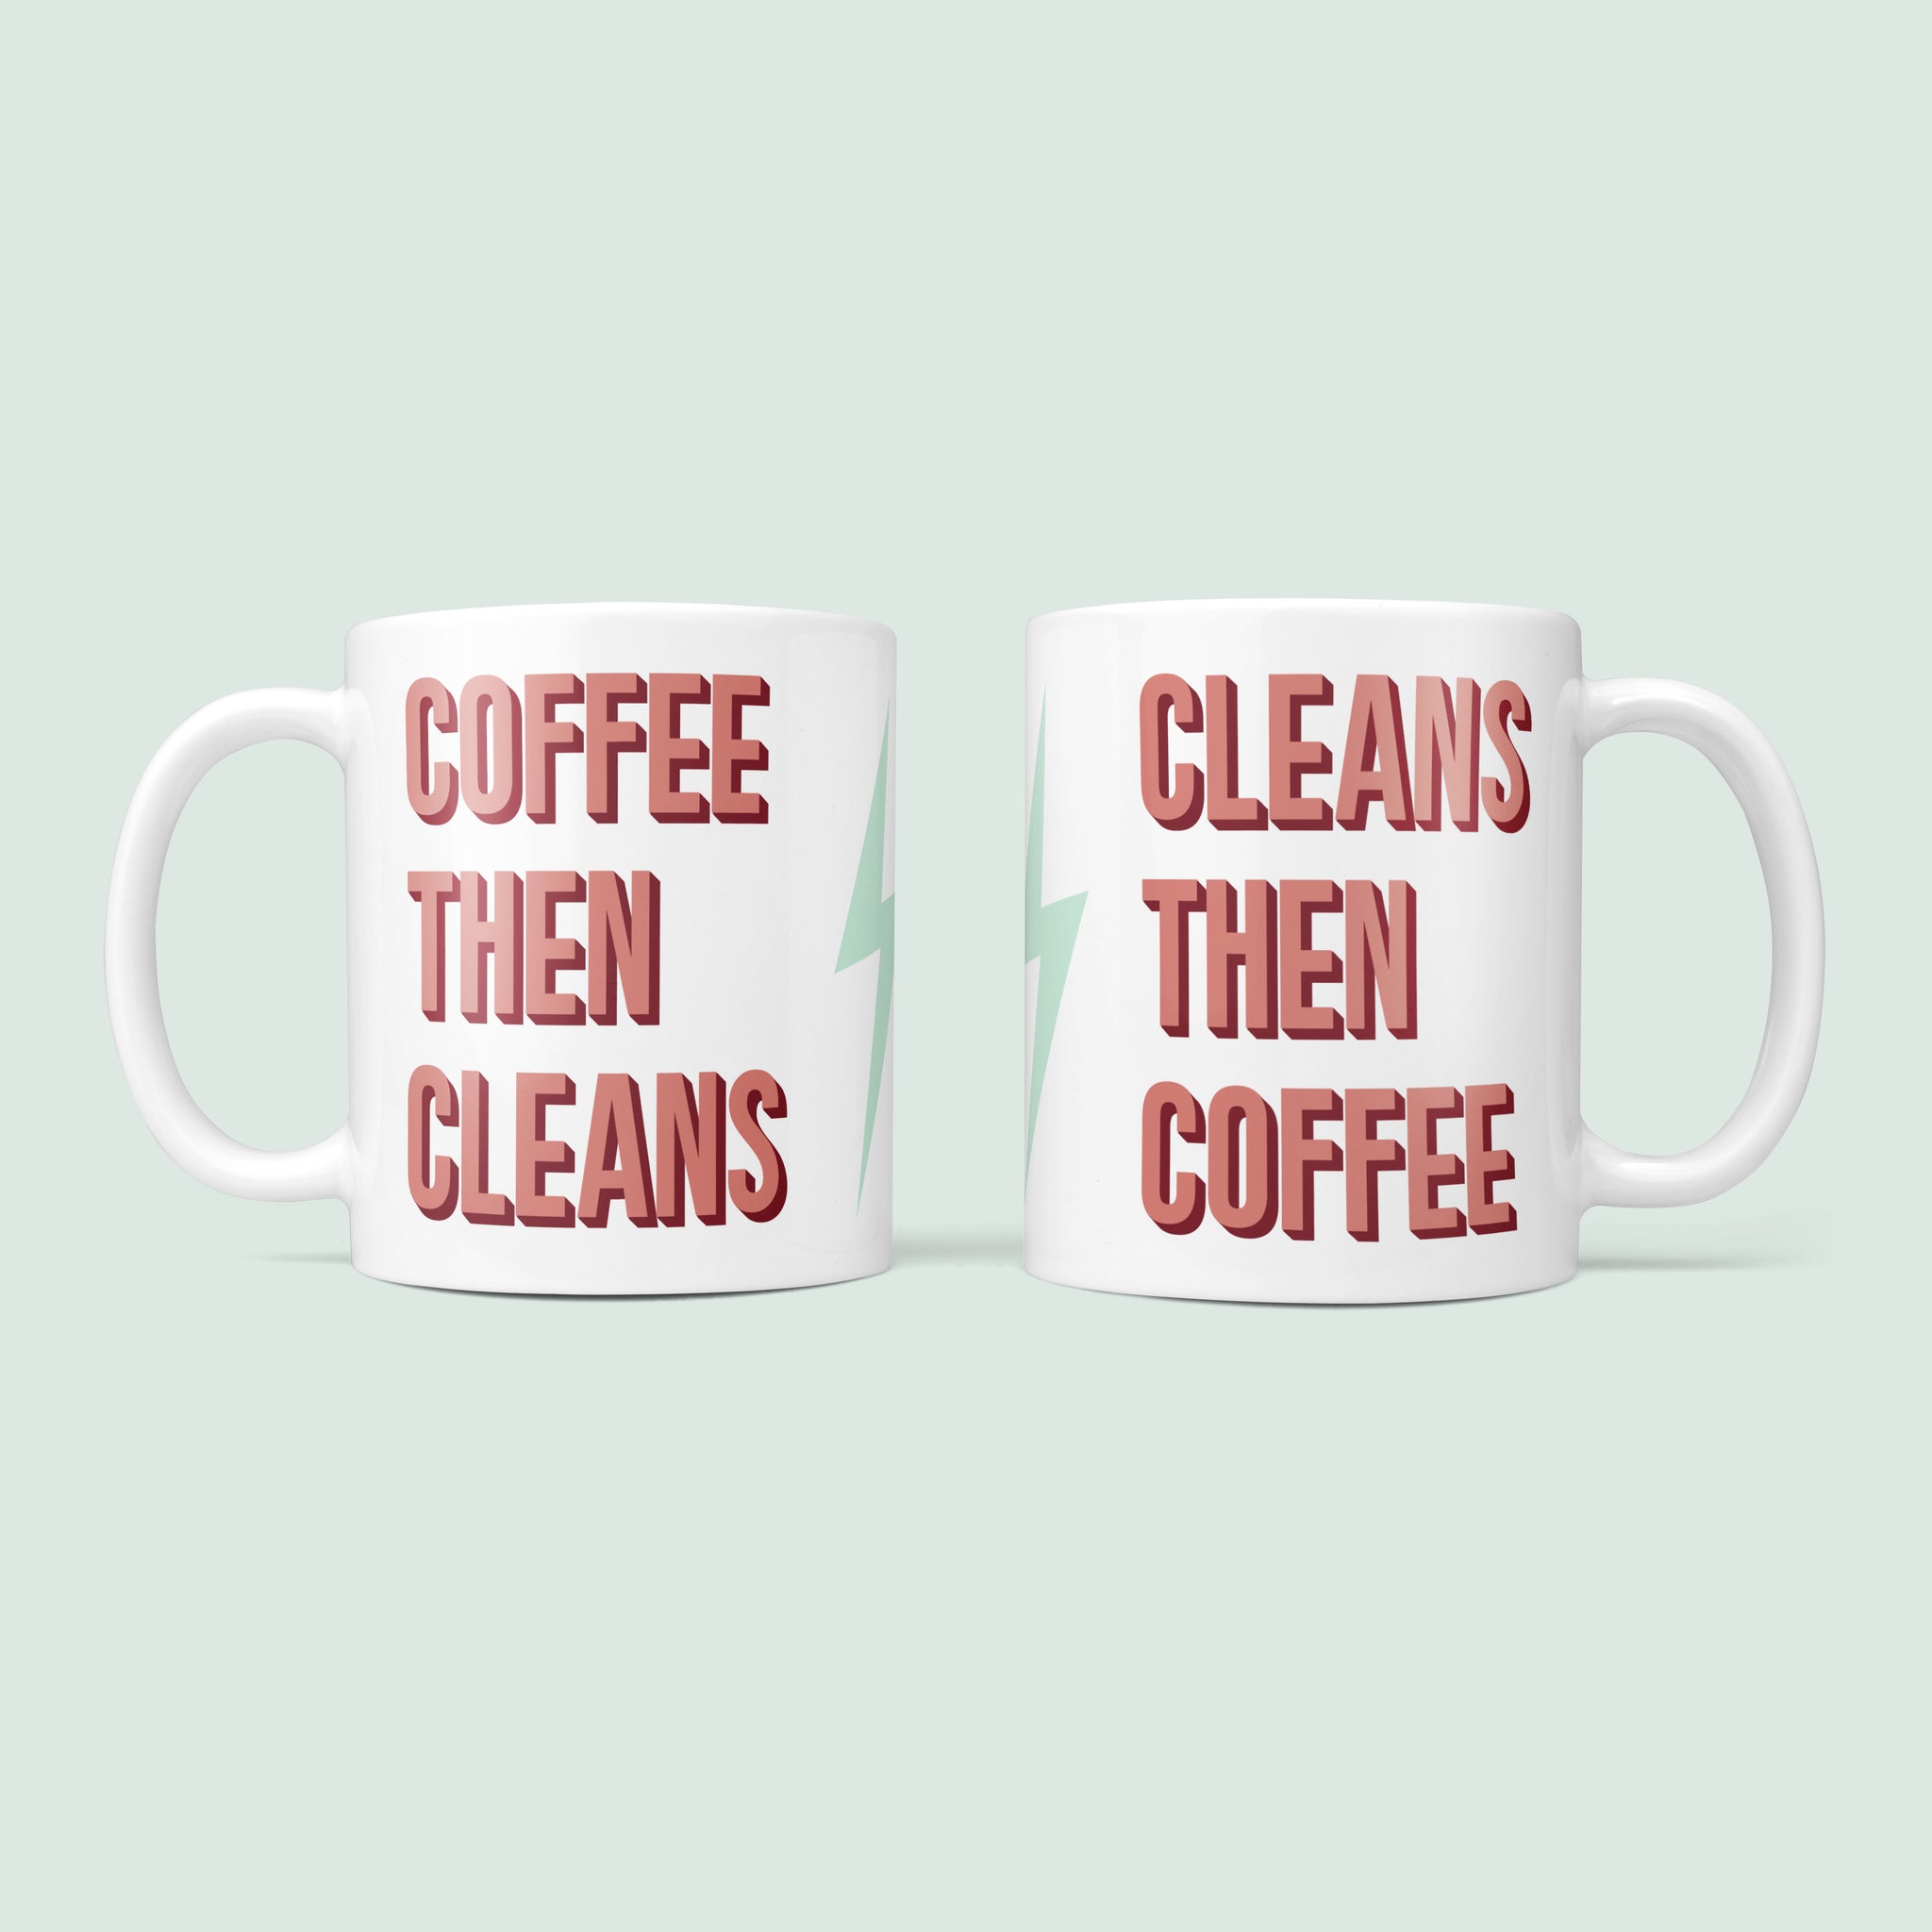 Coffee Then Cleans - Fun Fitness Mug